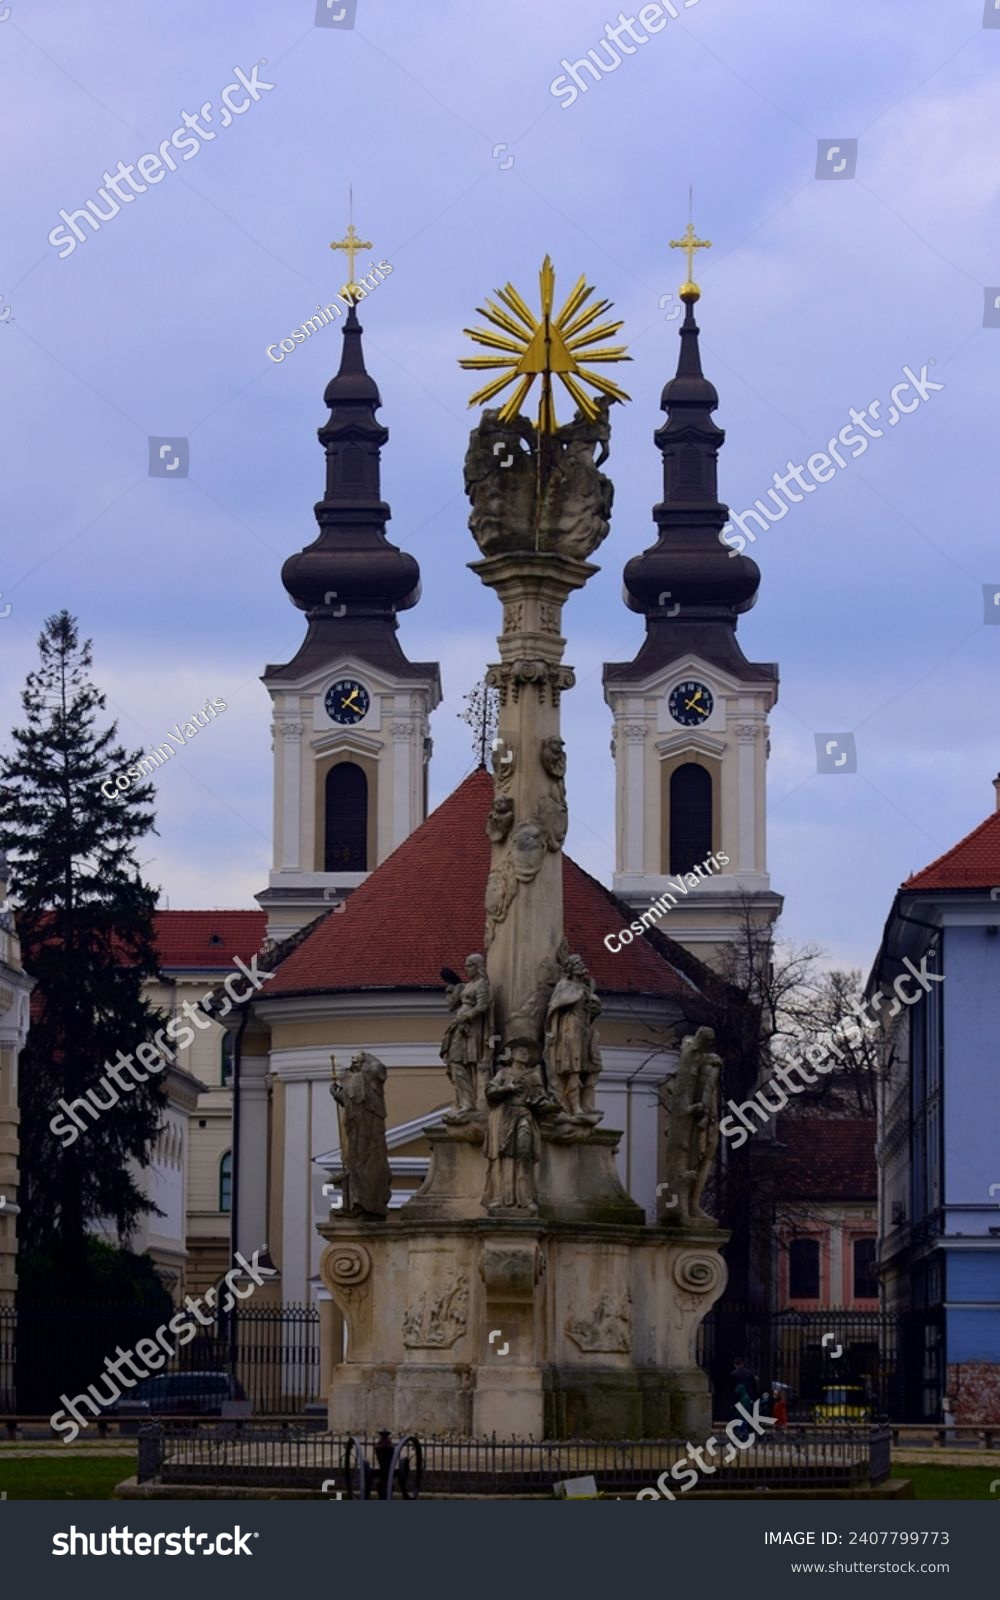 Urban image from Timisoara, Romania. The Plague Statue or Holy Trinity Statue is framed by the towers of the Serbian Church. #2407799773